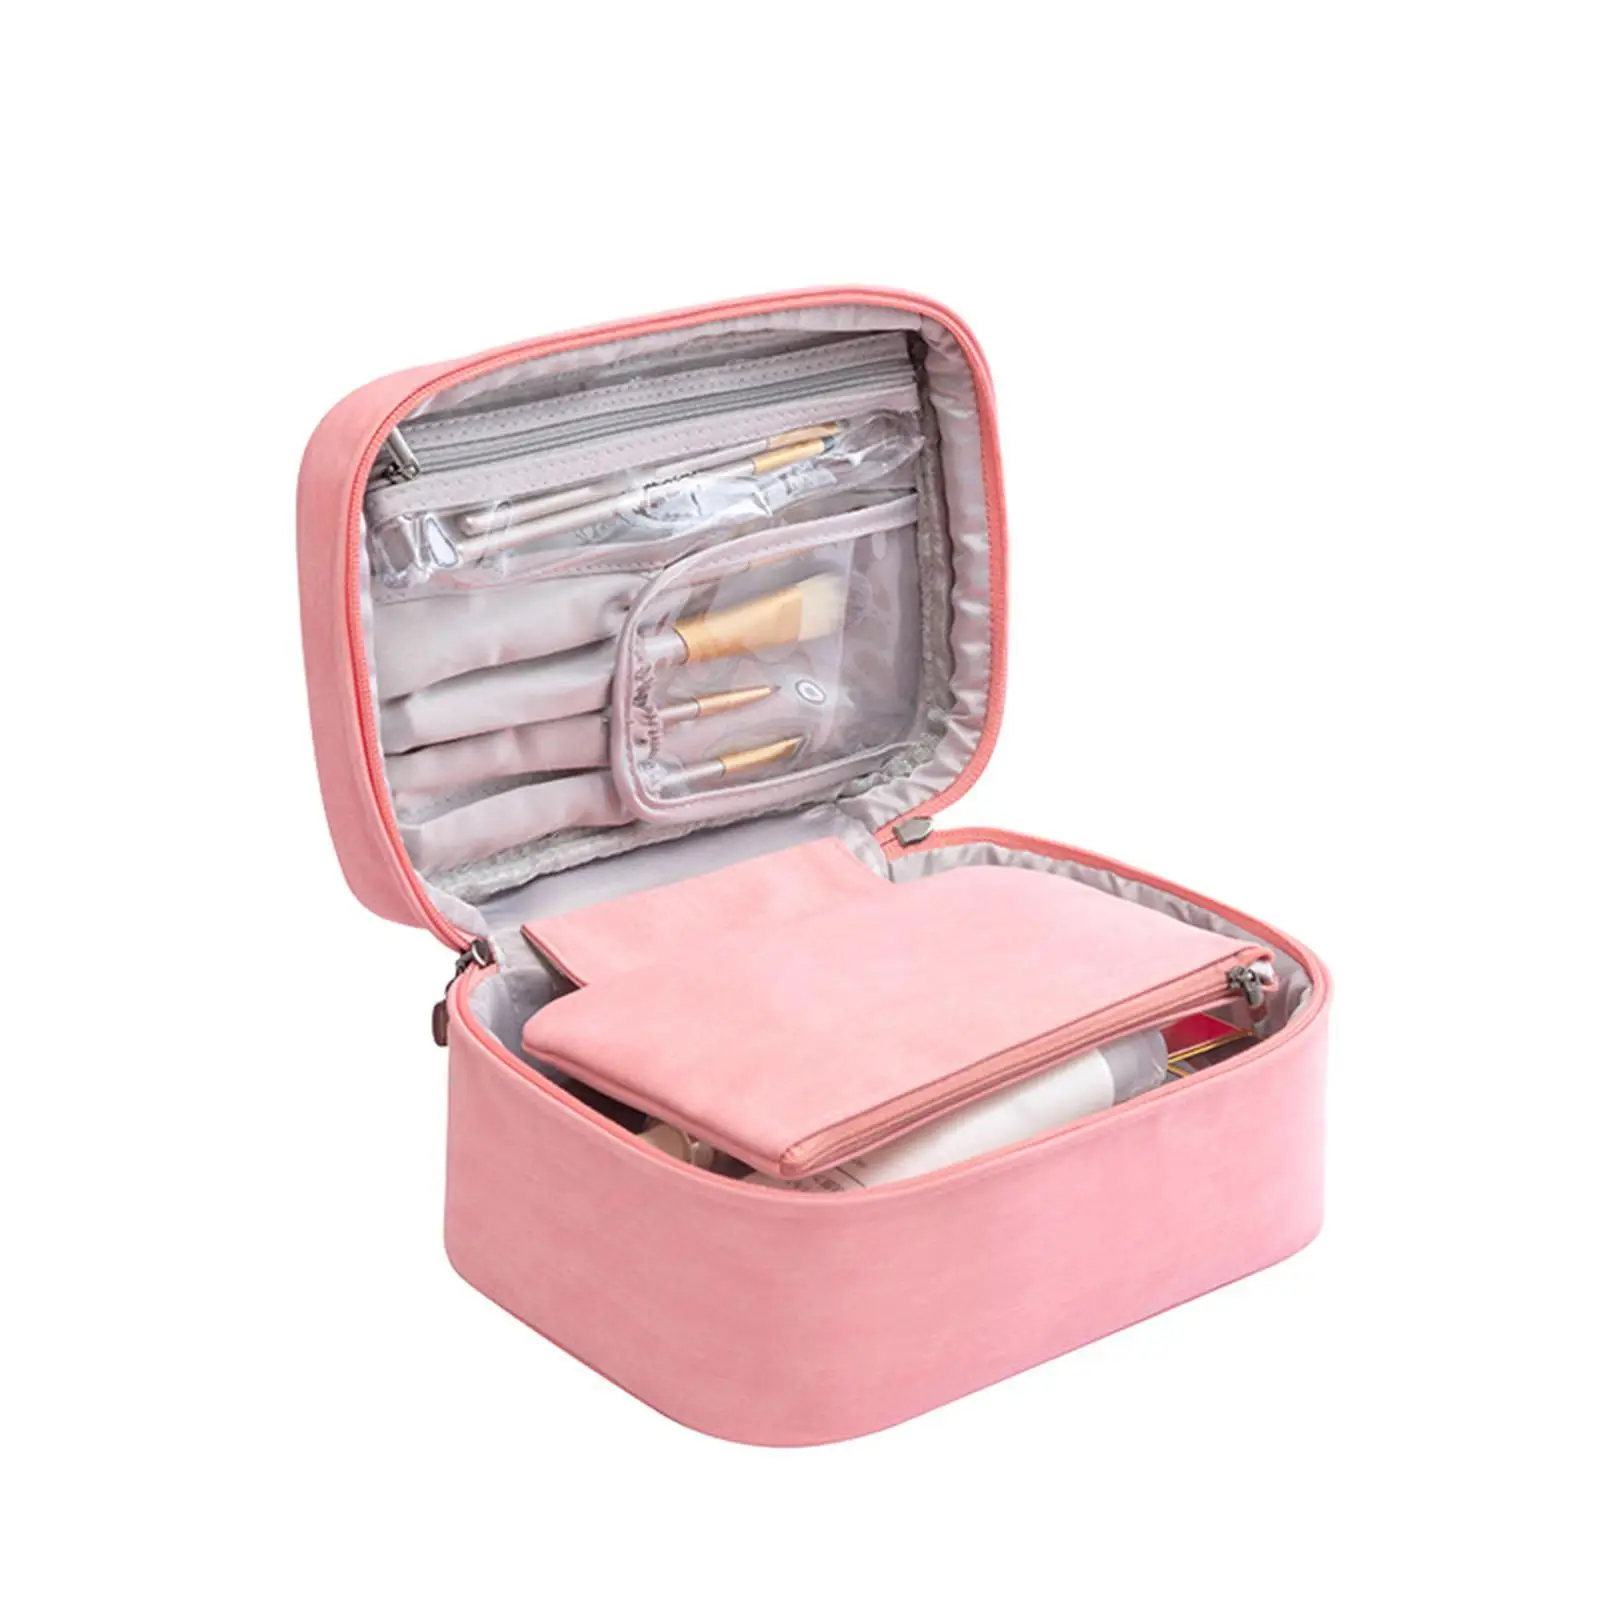 Makeup Organizer Bag with Detachable Pouch PU Resin for Eyebrow Pencil